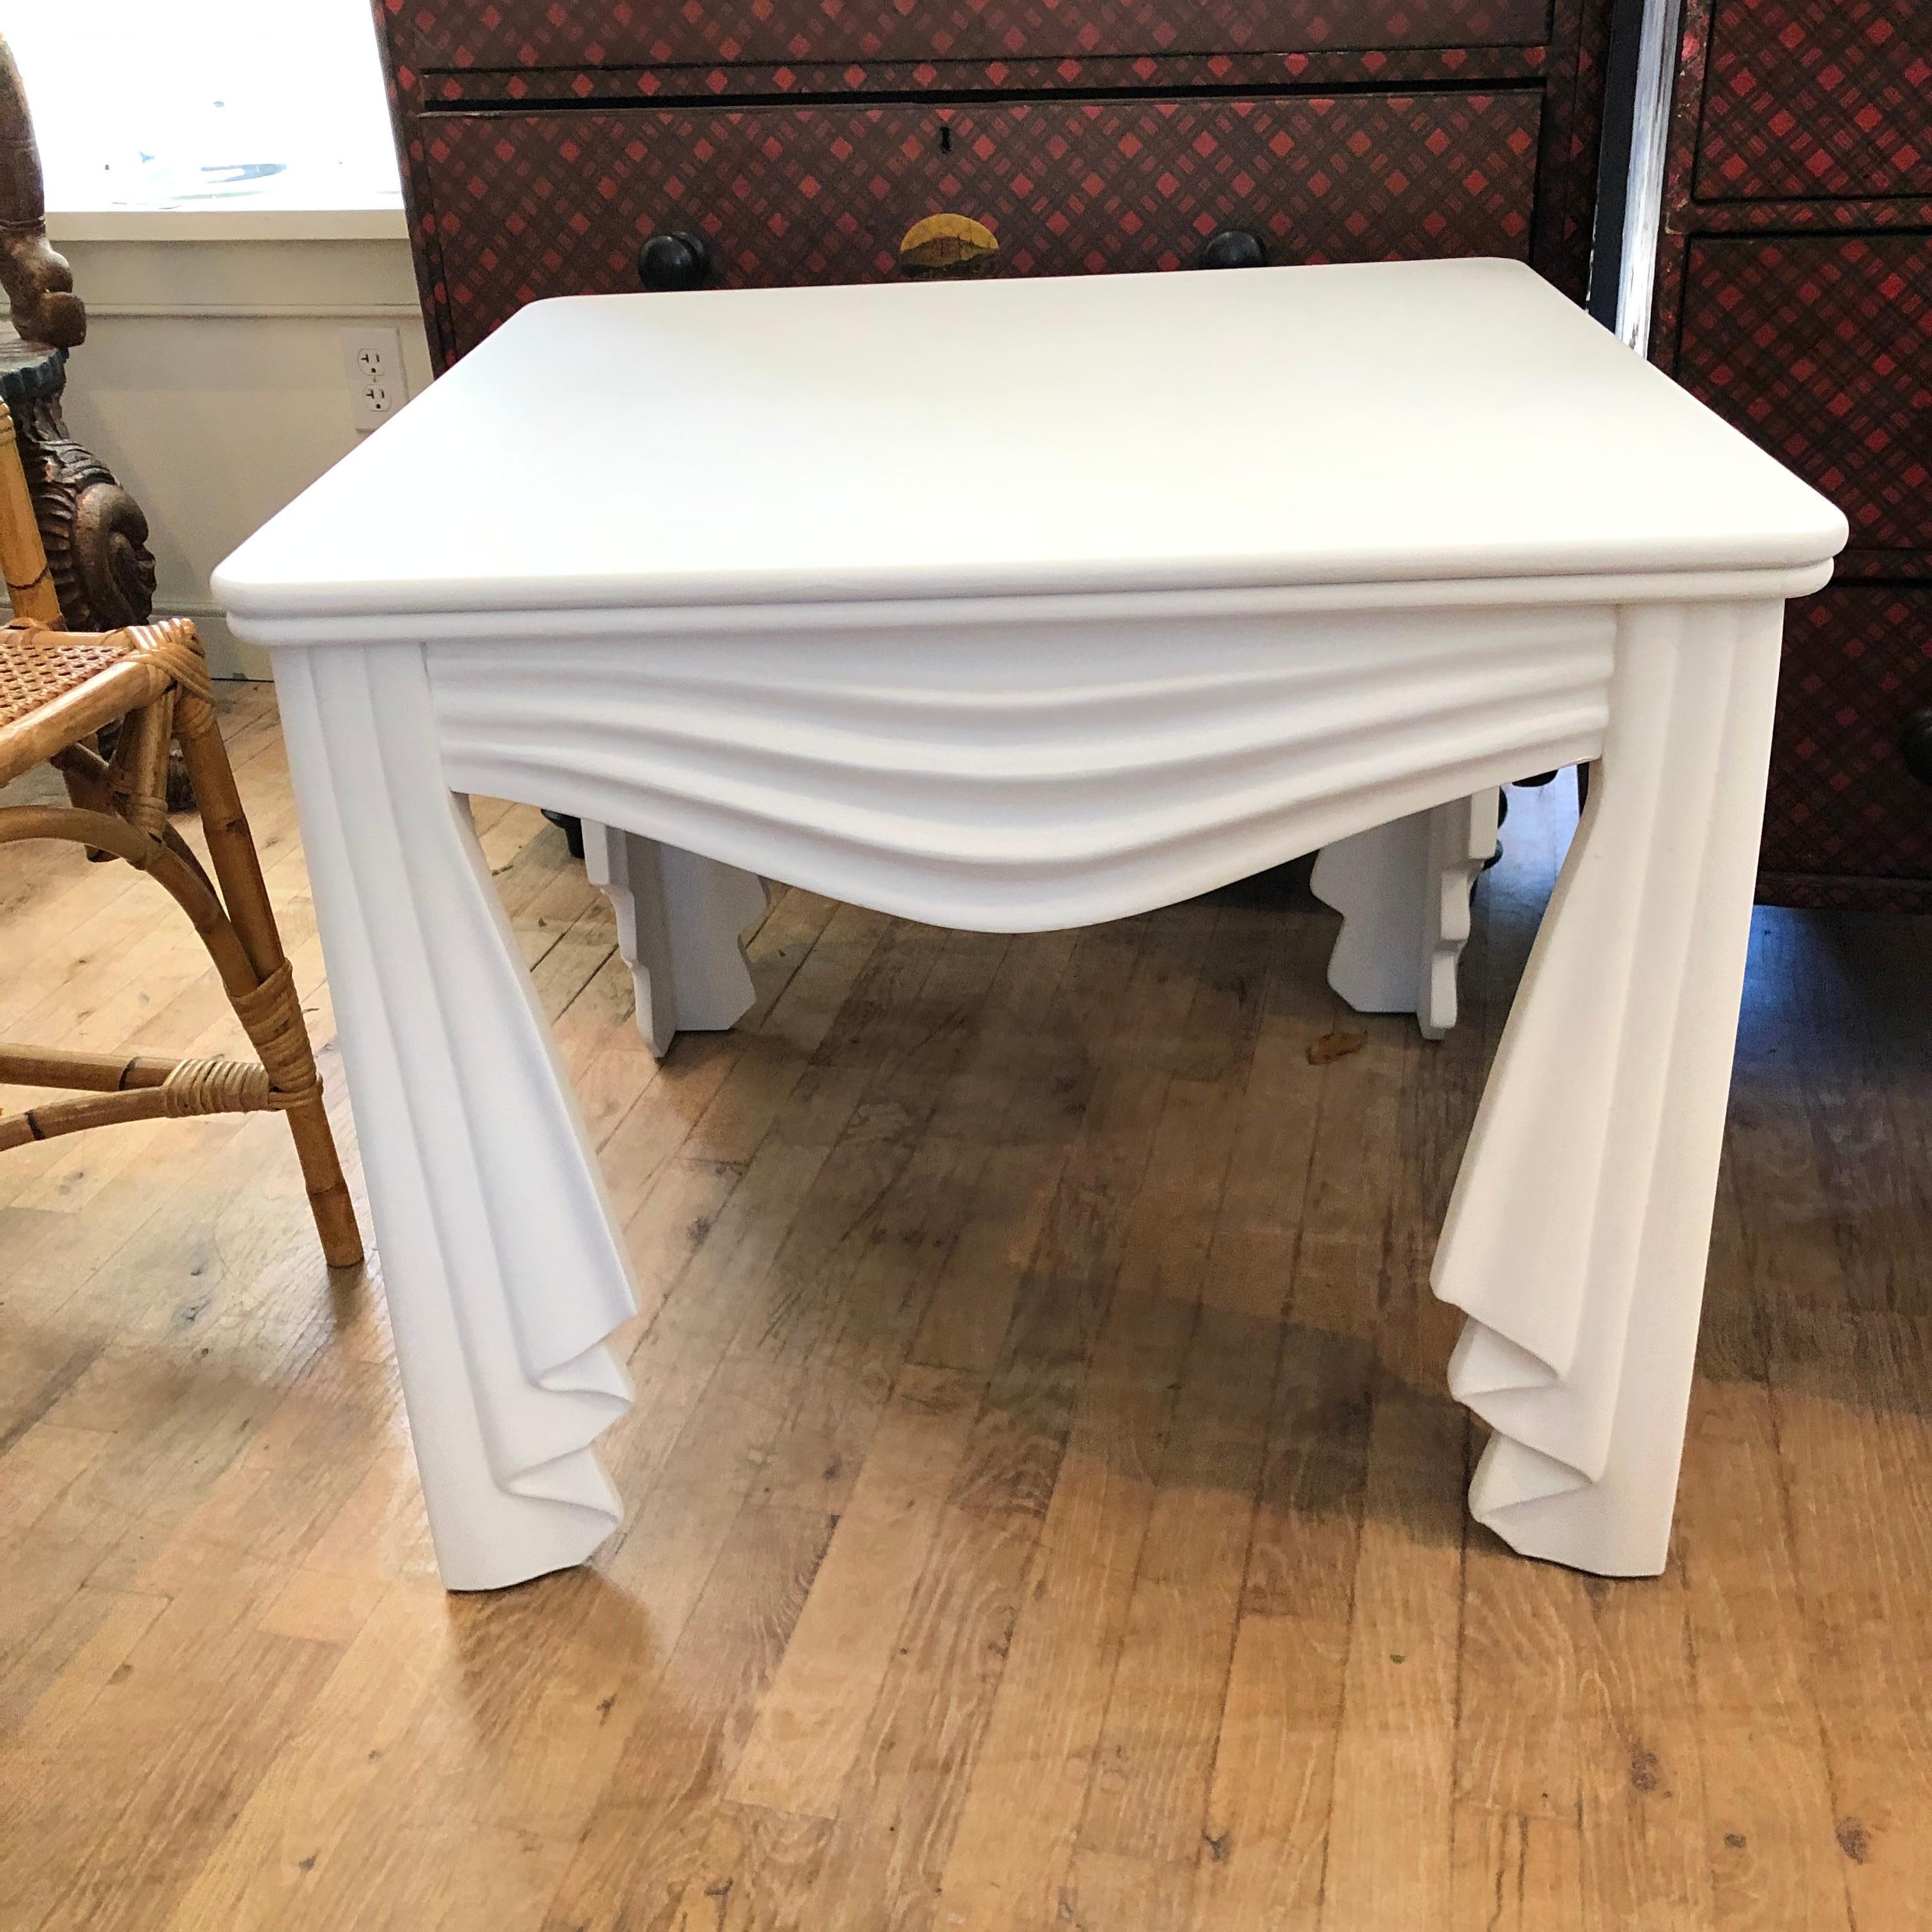 Beautiful faux fabric draped carved wood table newly painted in flat white ... in the style of John Dickinson ....